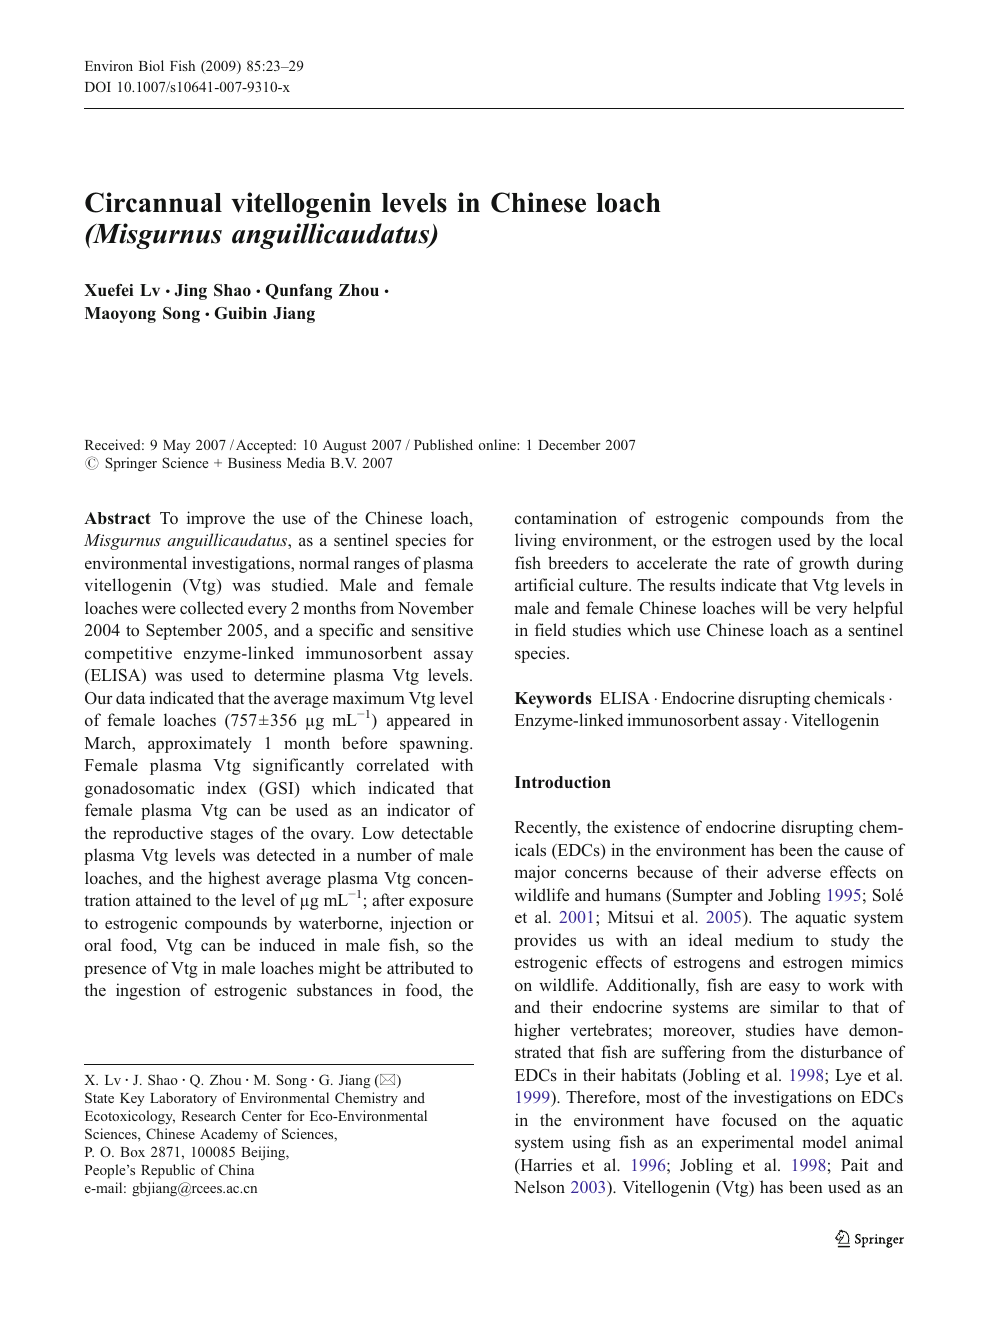 Circannual Vitellogenin Levels In Chinese Loach Misgurnus Anguillicaudatus Topic Of Research Paper In Animal And Dairy Science Download Scholarly Article Pdf And Read For Free On Cyberleninka Open Science Hub